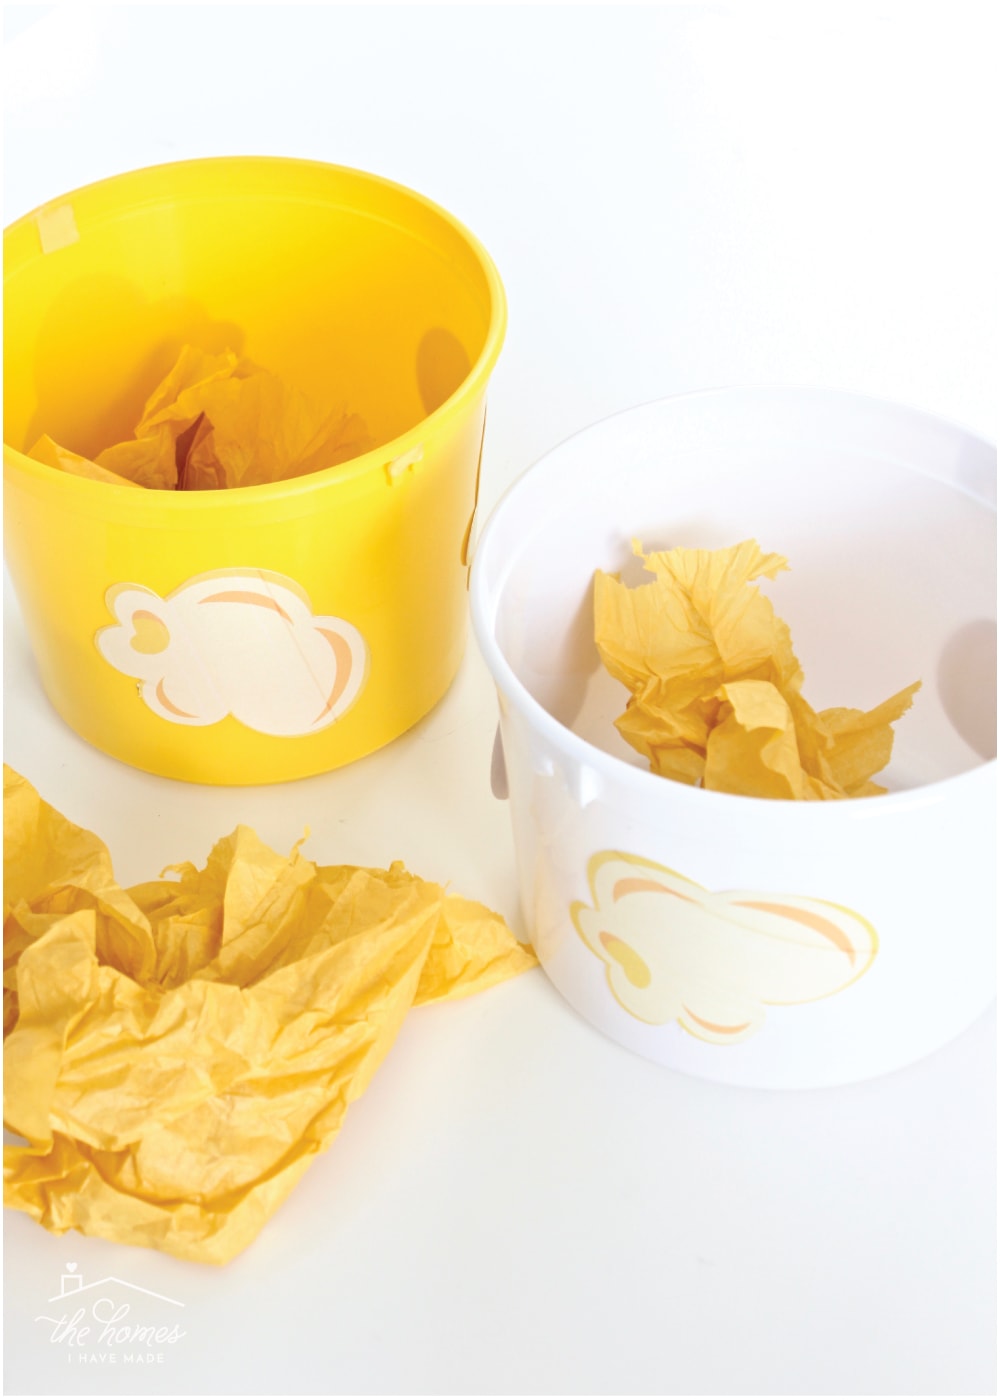 Get your Cub Scout Pack excited to sell popcorn with these fun DIY Cub Scout Popcorn Projects!